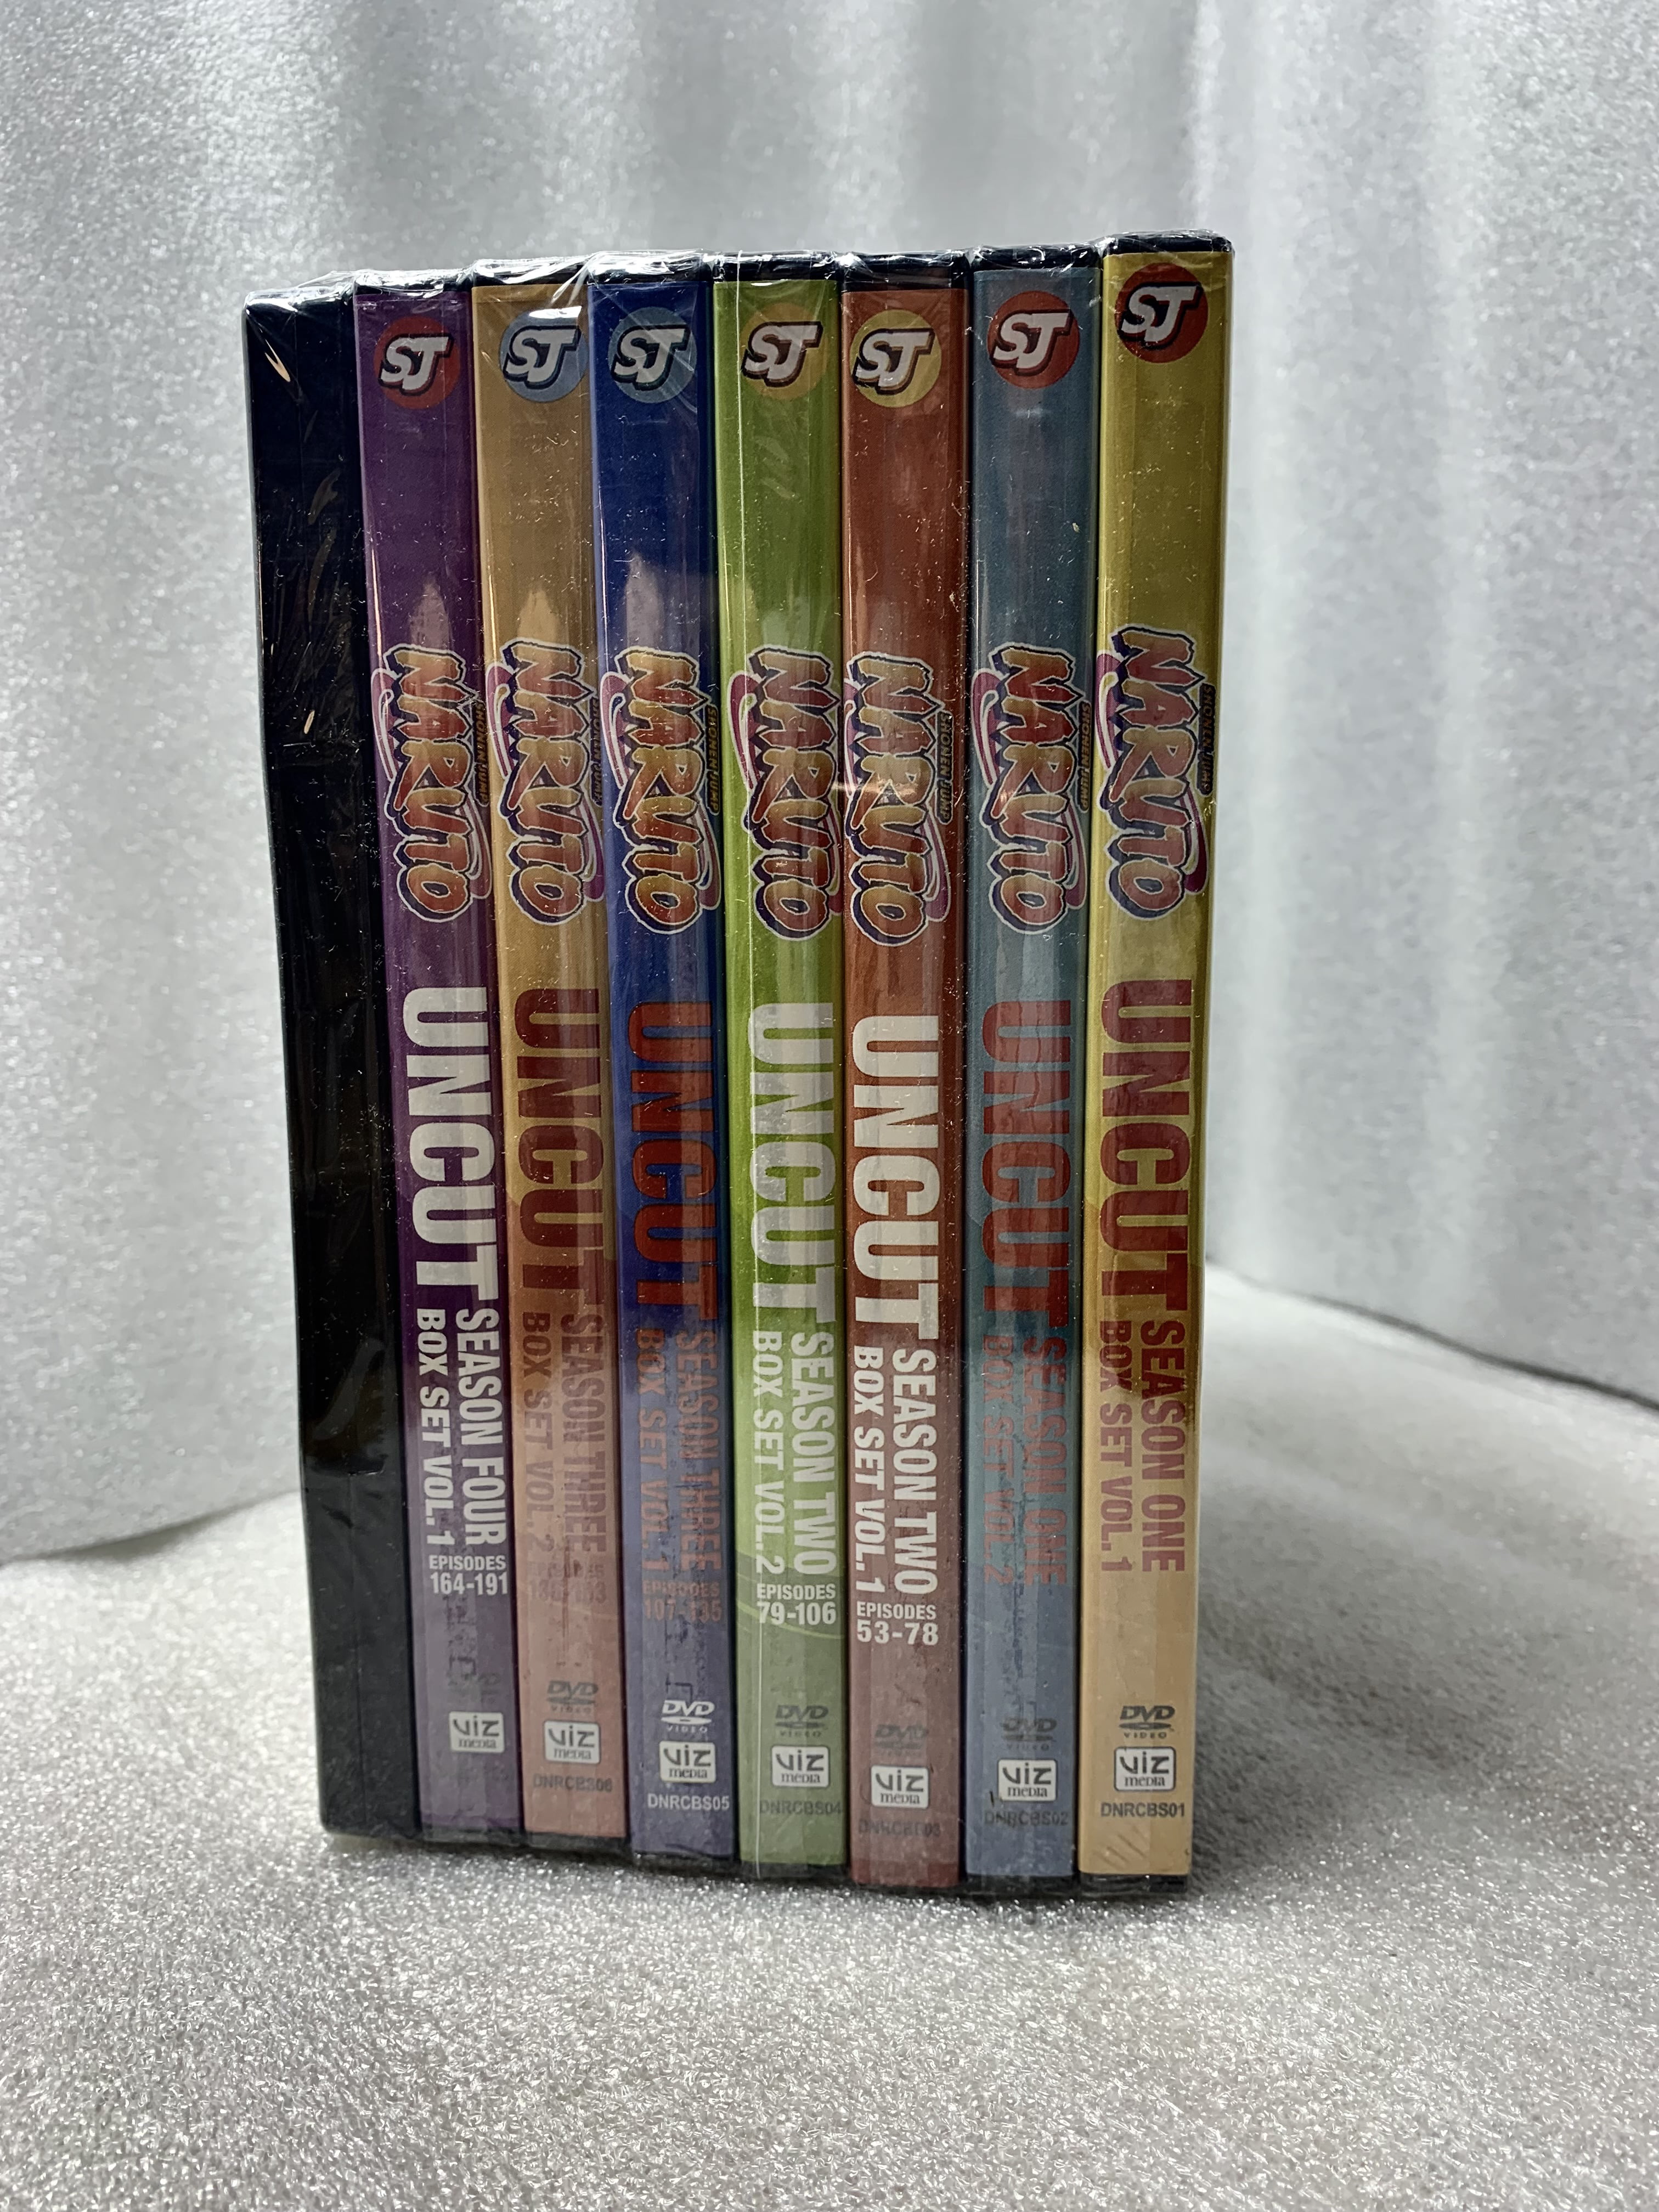  Naruto Uncut: Complete Seasons 1-4 (8 Box-Set Pack: 220 Episodes  on 48 Discs) : Movies & TV